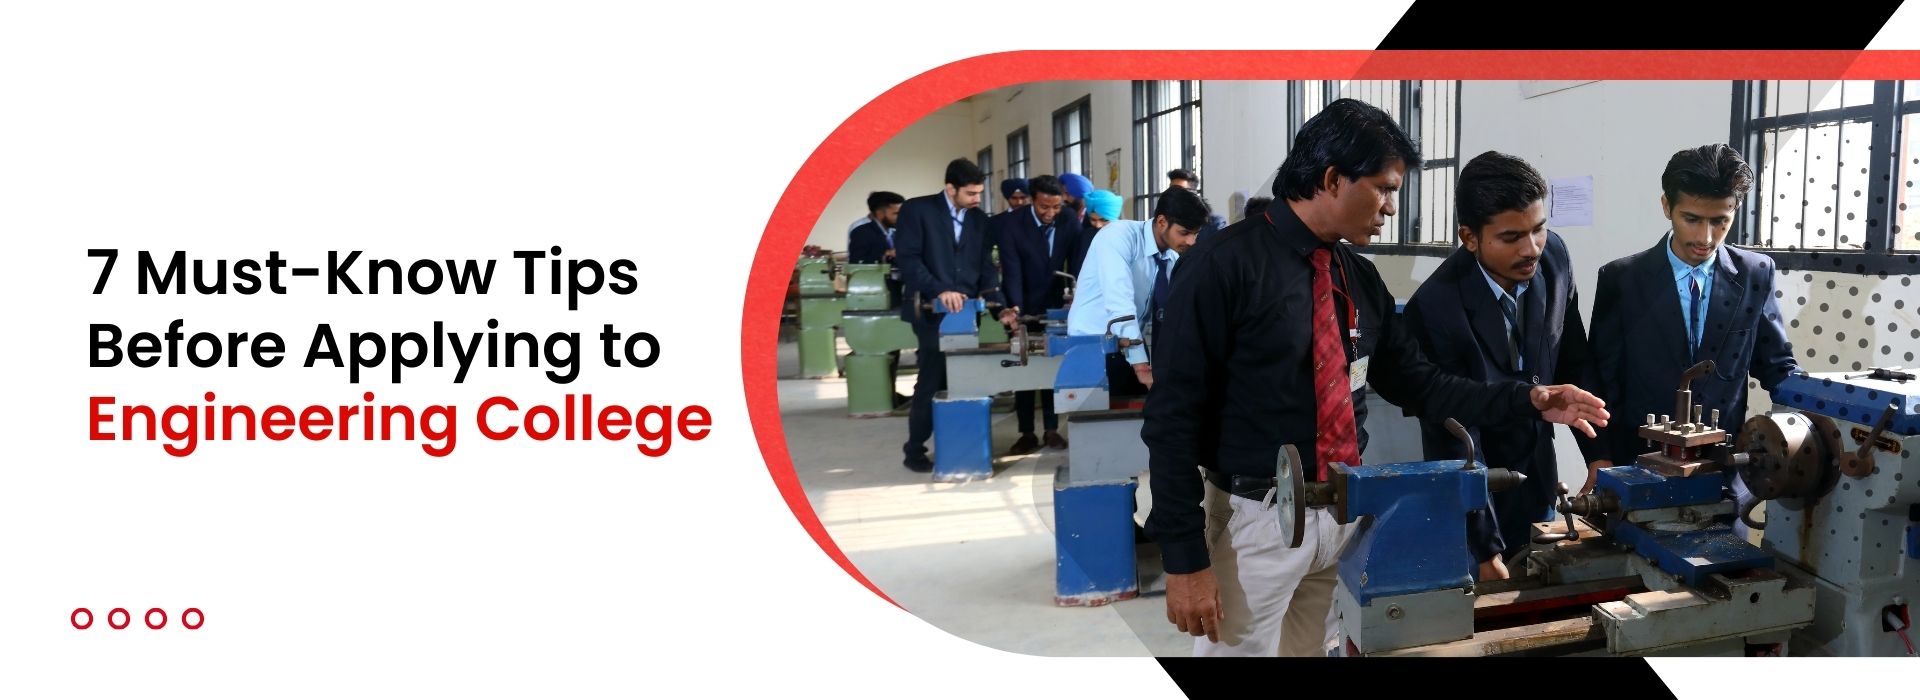 7 Must-Know Tips Before Applying to Engineering College